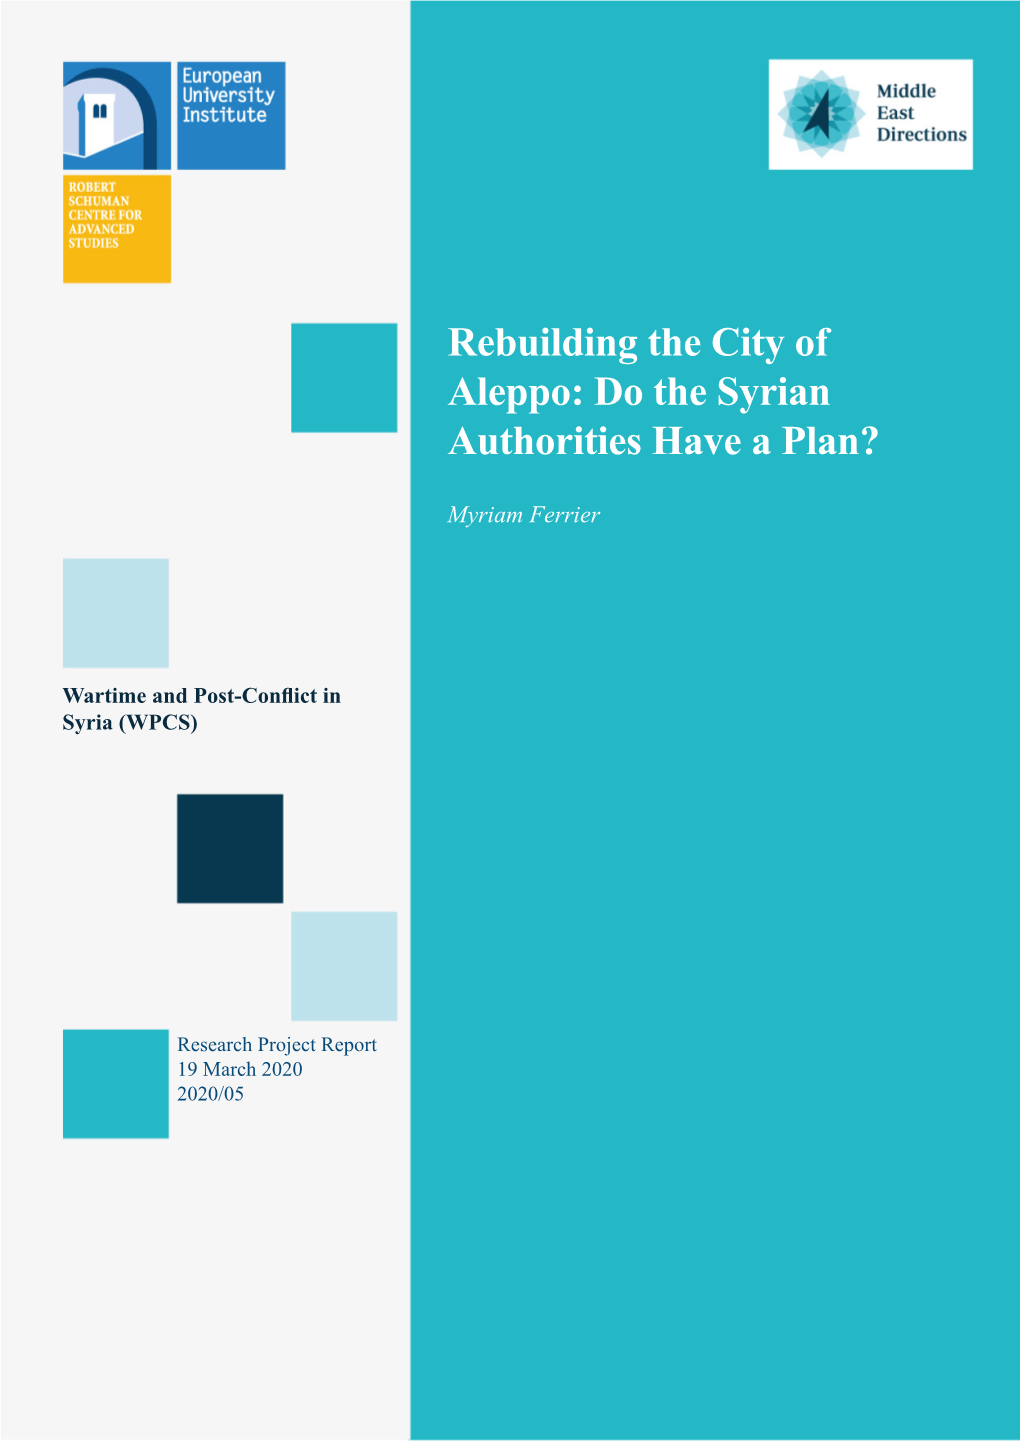 Rebuilding the City of Aleppo: Do the Syrian Authorities Have a Plan?